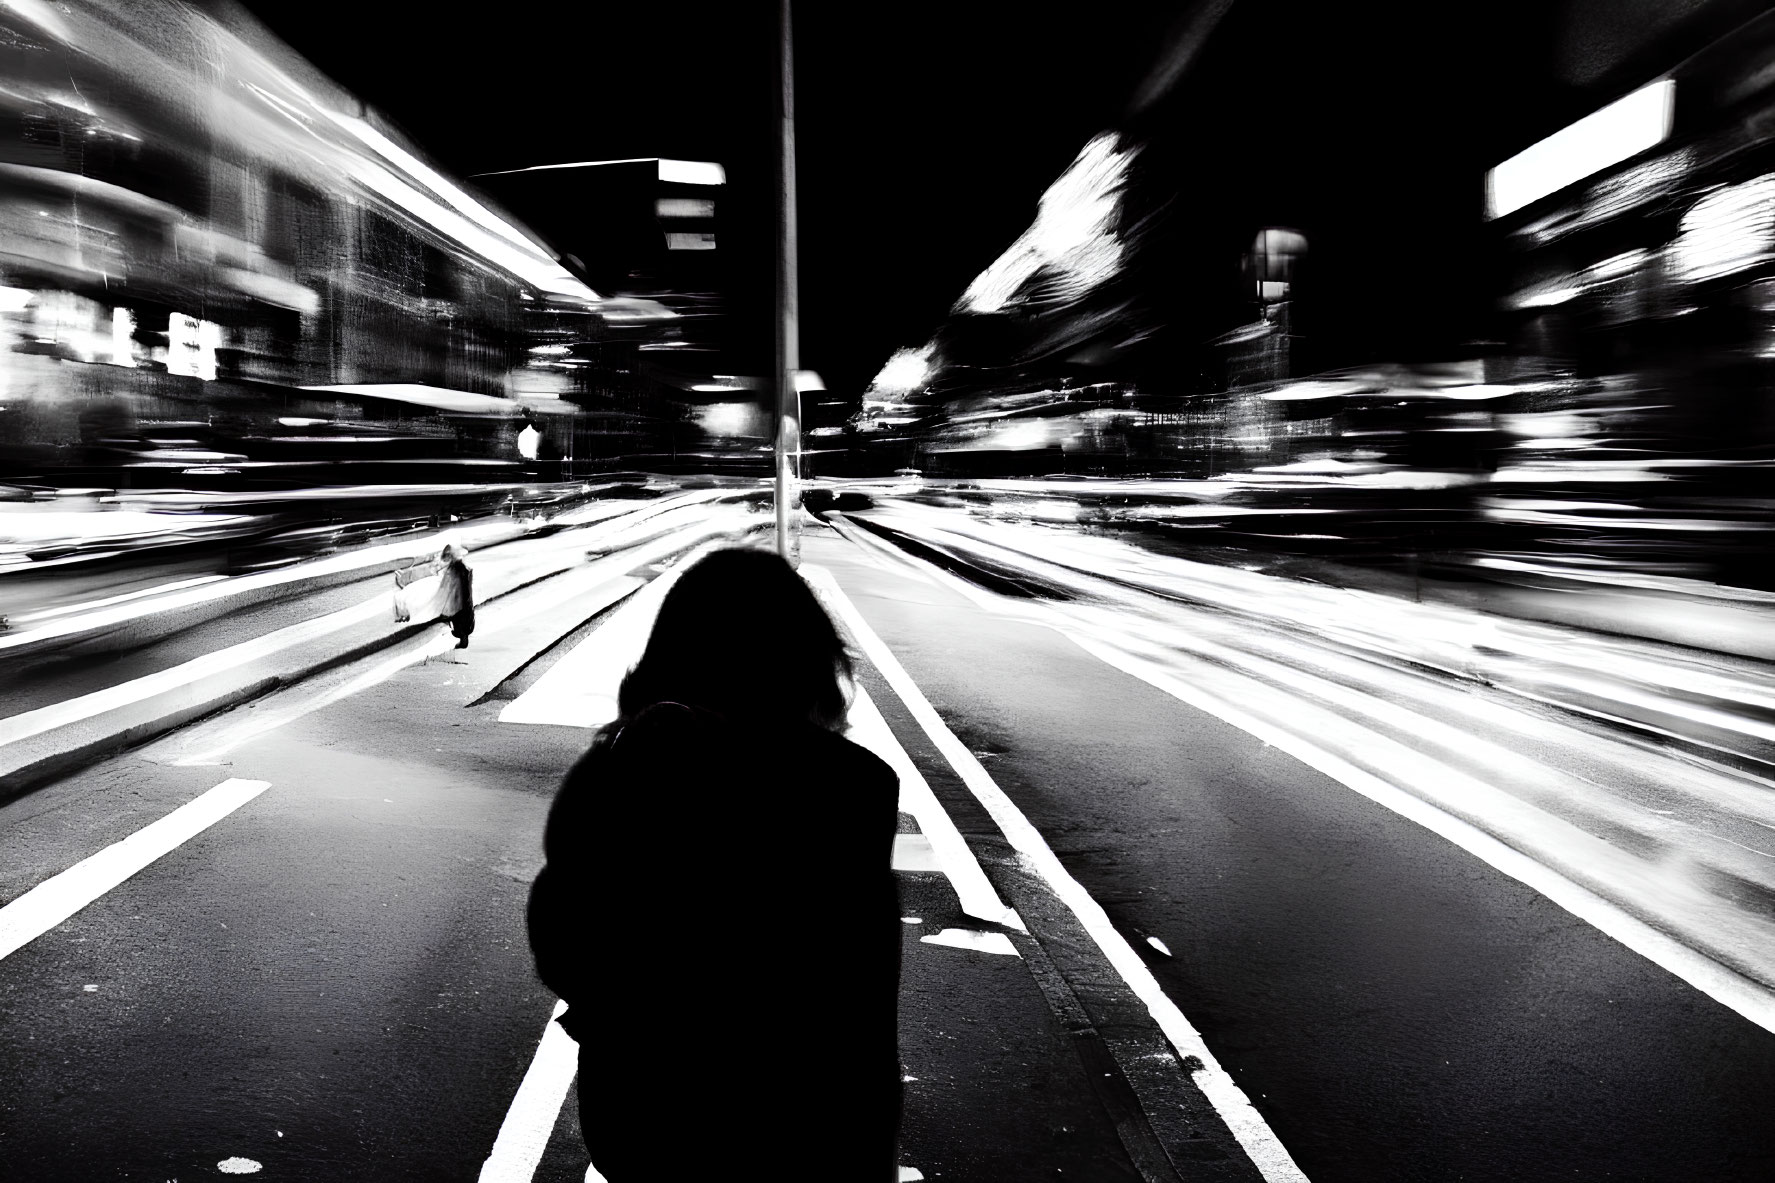 Solitary figure in urban night scene, high-contrast black and white.